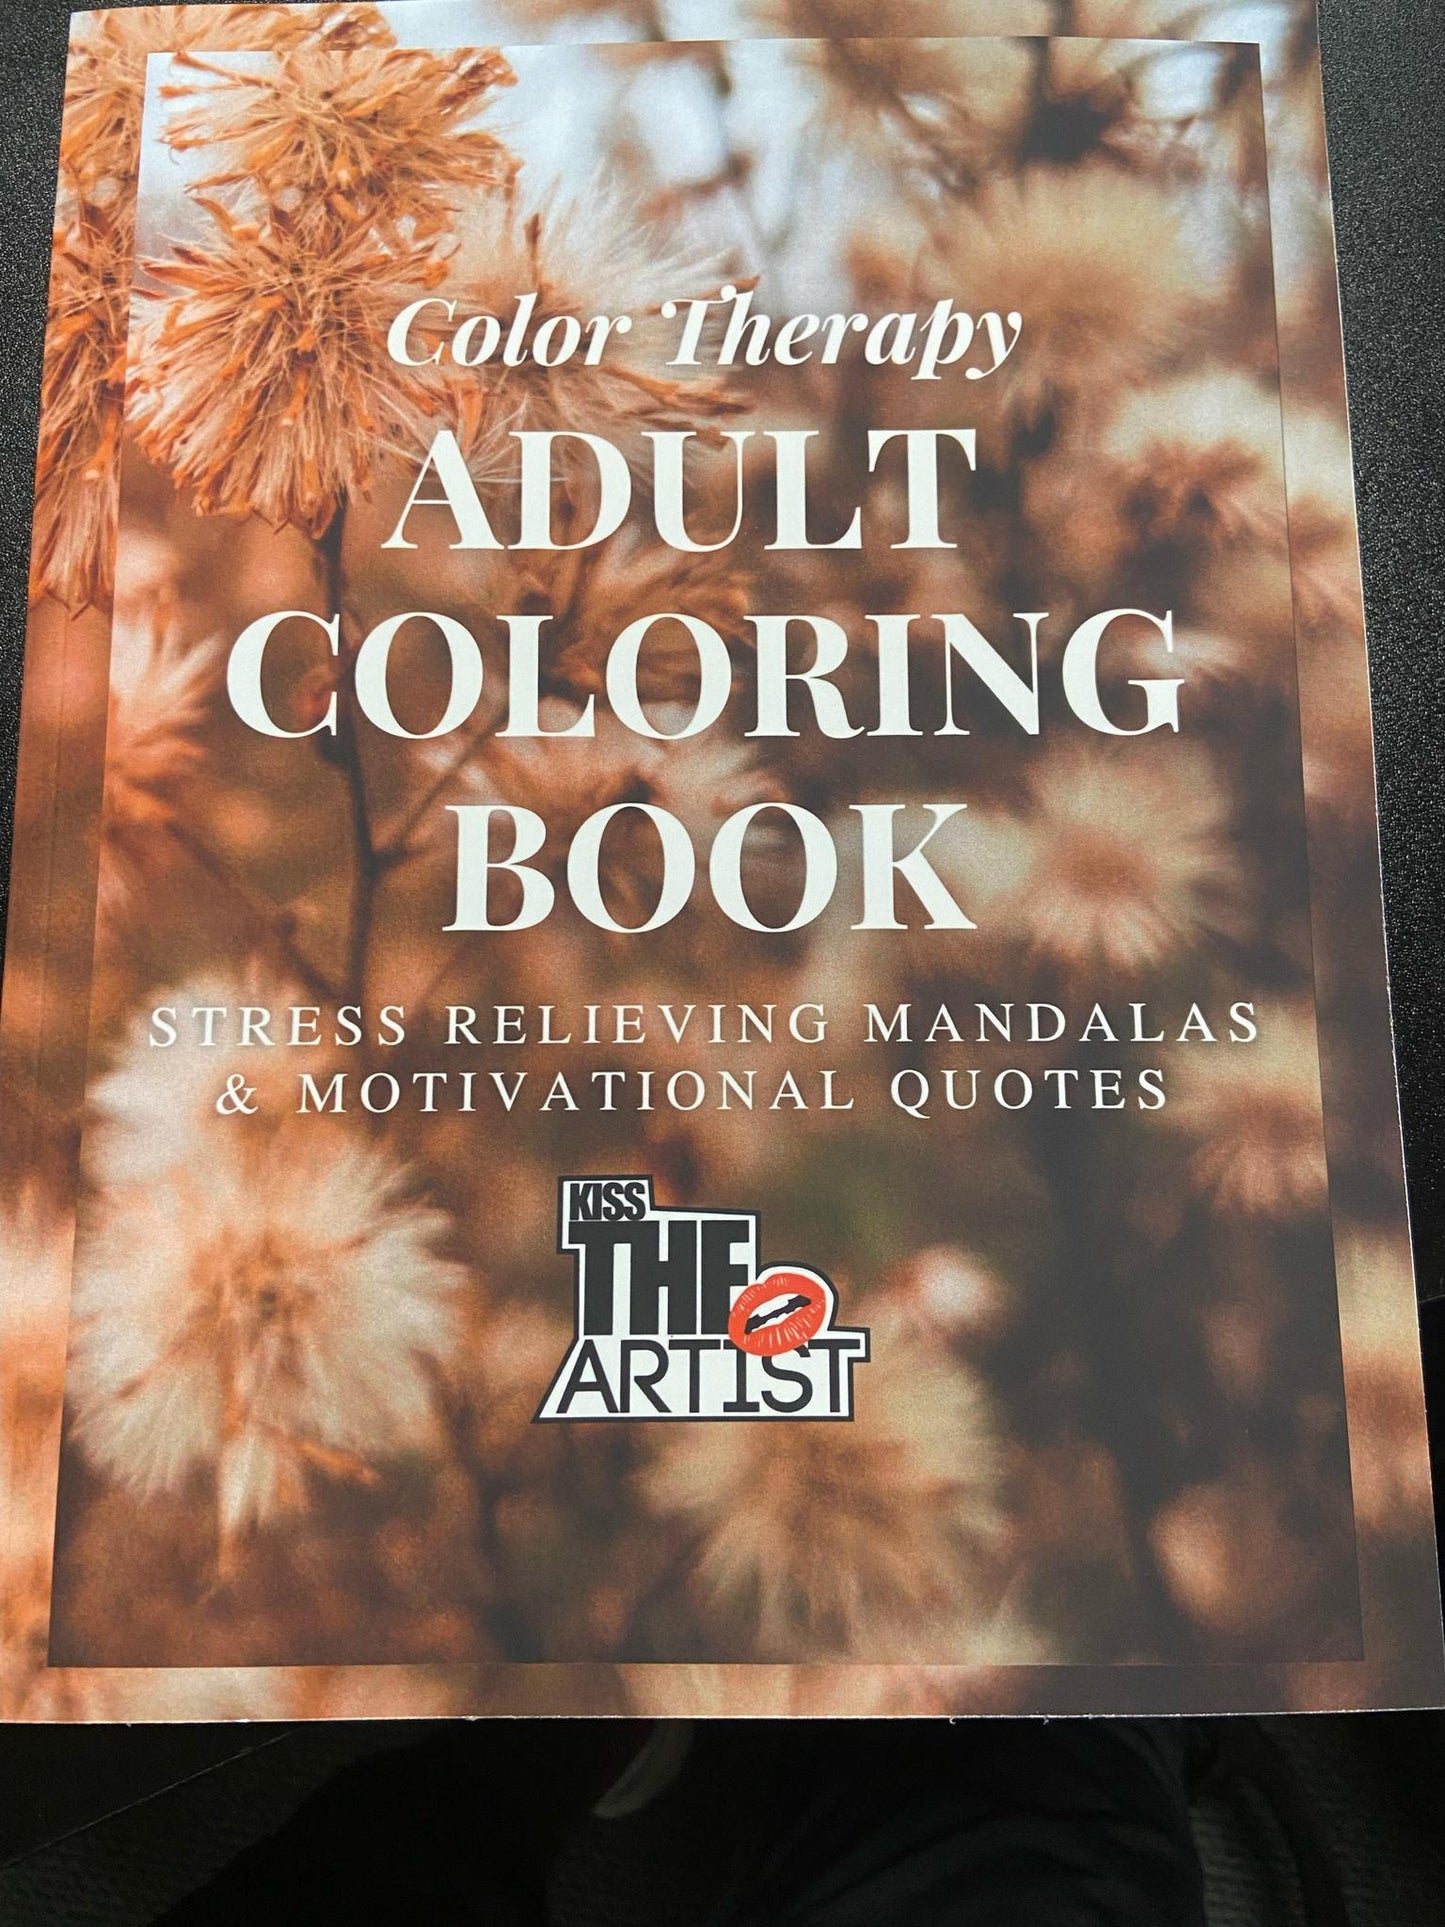 Color Therapy ADULT COLORING BOOK.  Stress Relieving Mandalas & Motivational Quotes